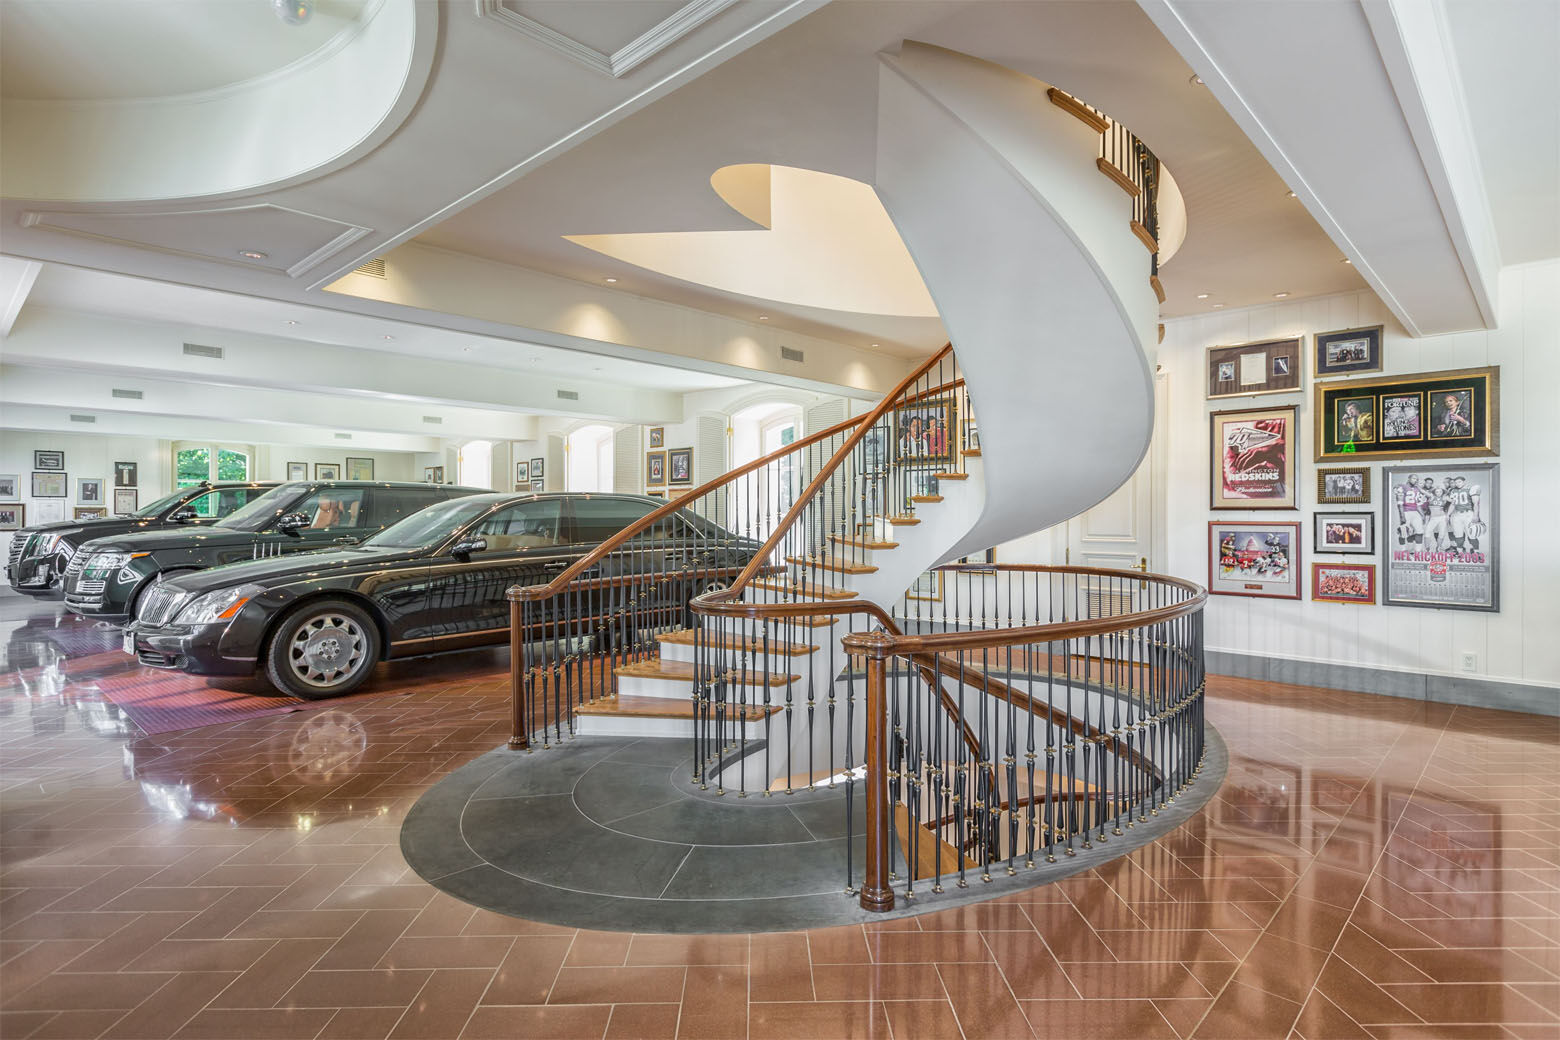 Washington Commanders' owner Dan Snyder has listed his five bedroom, 30,000-square foot mansion in Potomac, Maryland, for $49 million. (Courtesy Sean Shanahan/TTR Sotheby's International Realty)